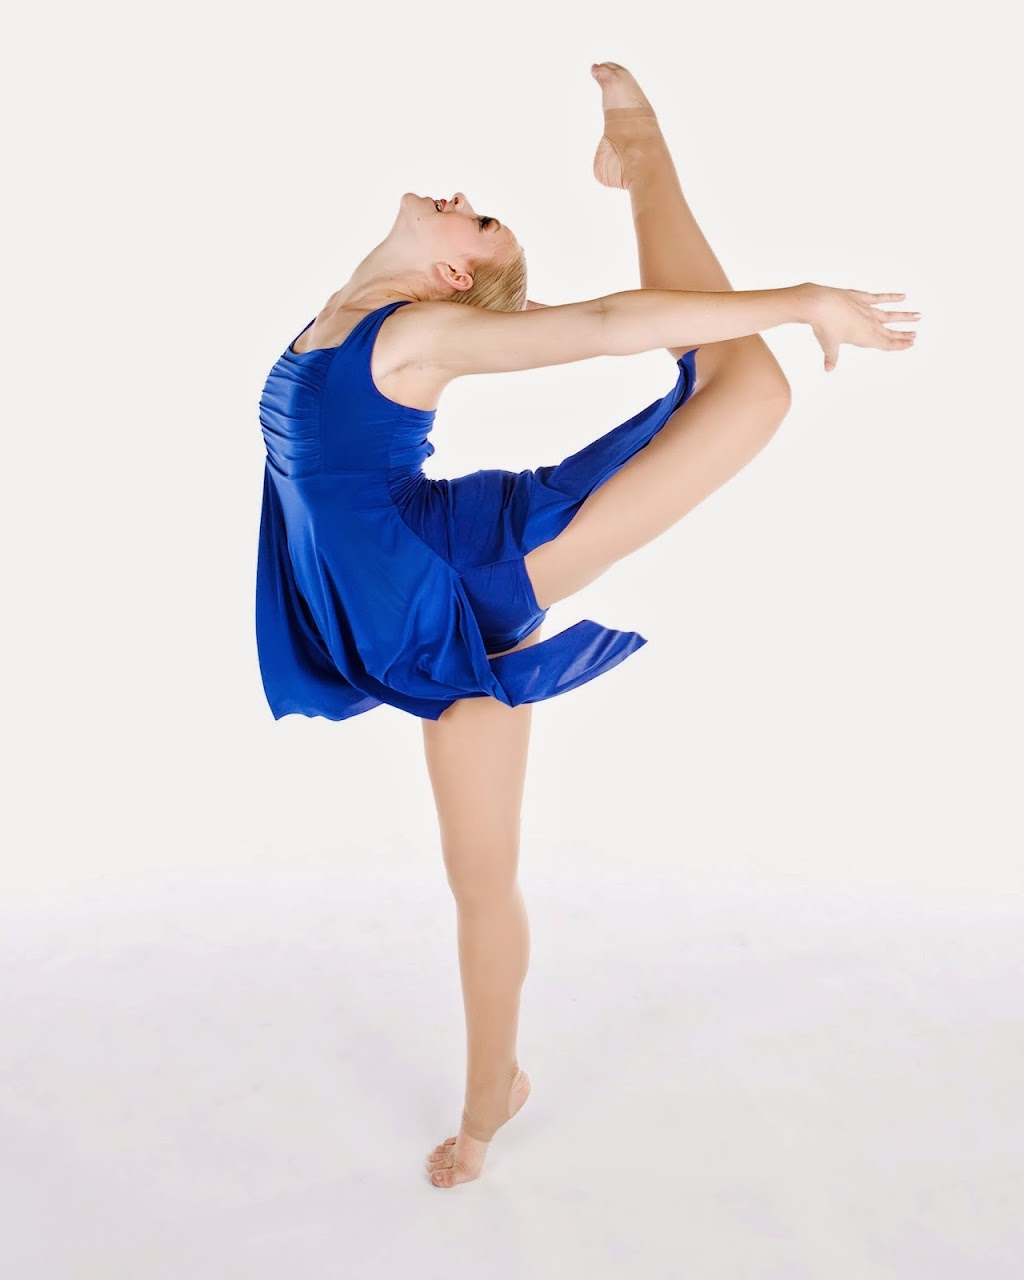 St Louis Academy of Dance | 9310 Olive Blvd, Olivette, MO 63132, USA | Phone: (314) 991-1663